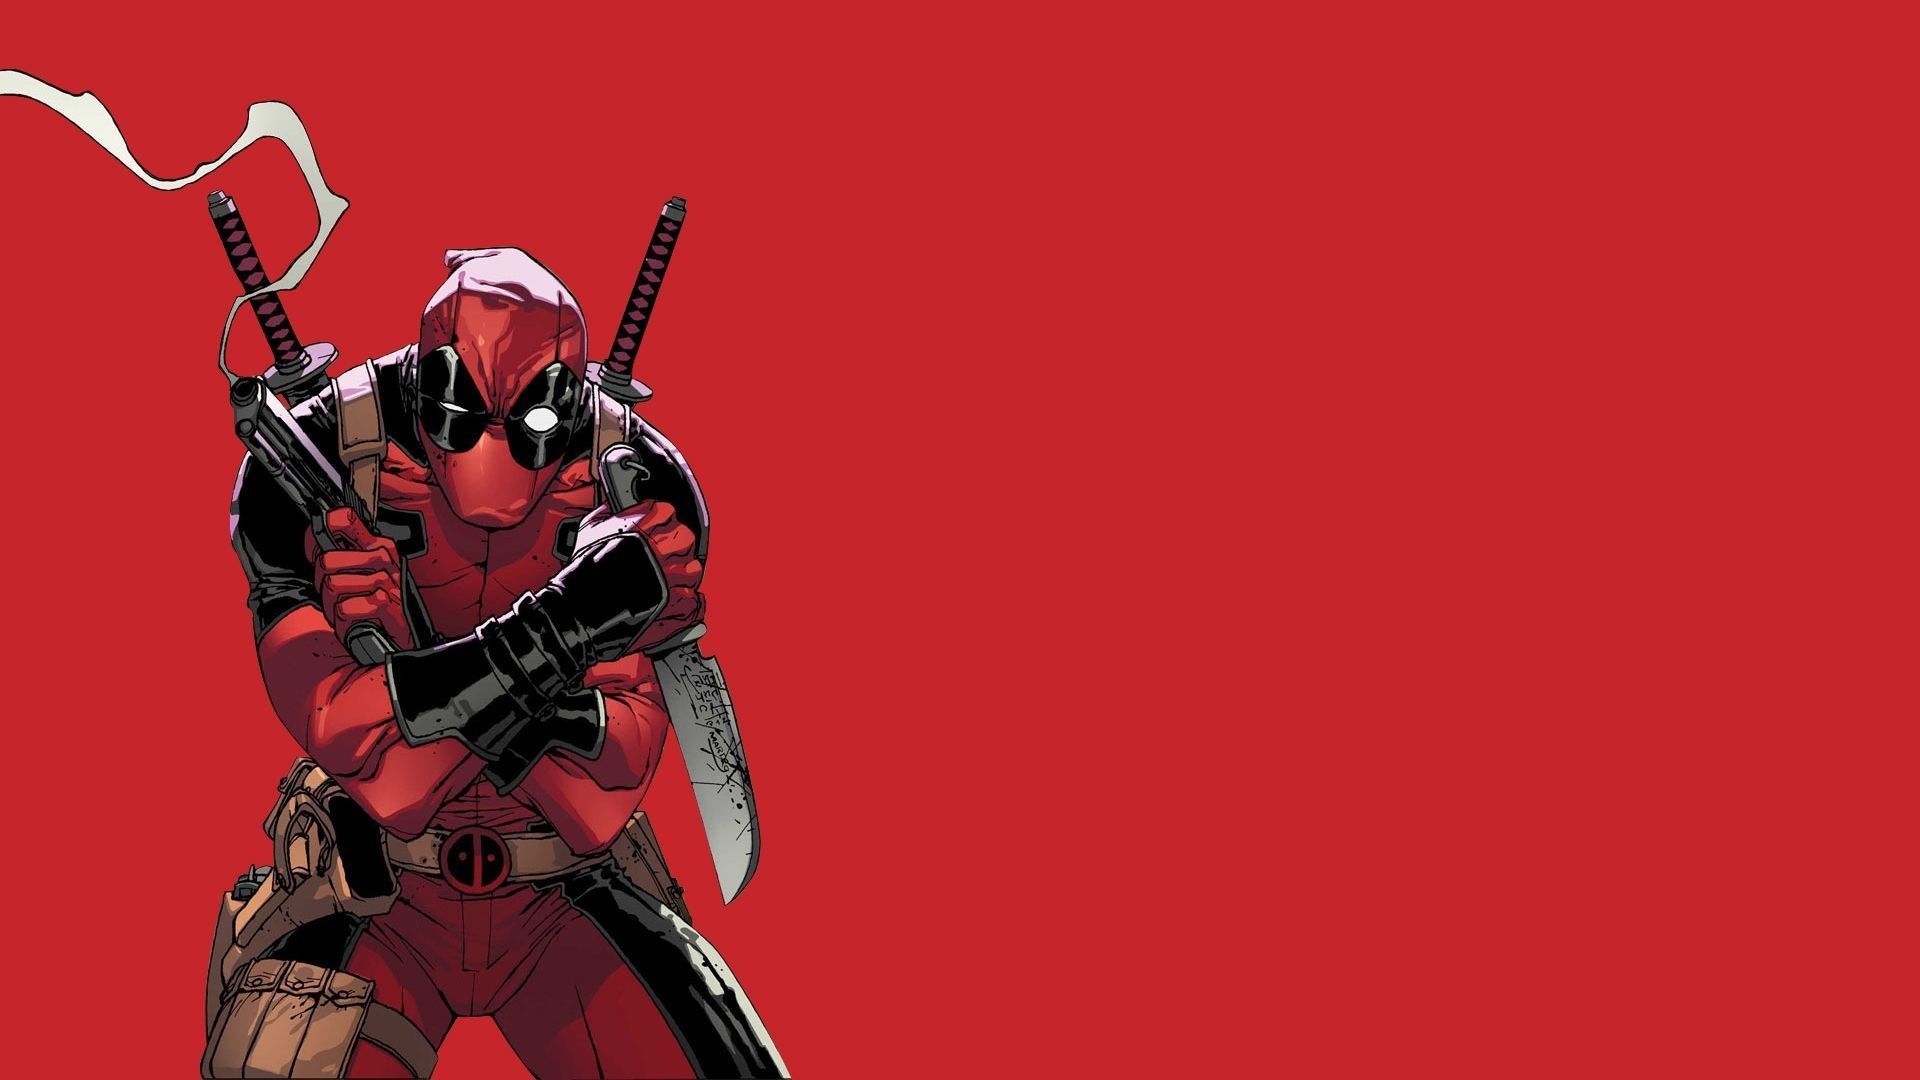 Deadpool Backgrounds Hd posted by Ryan Simpson